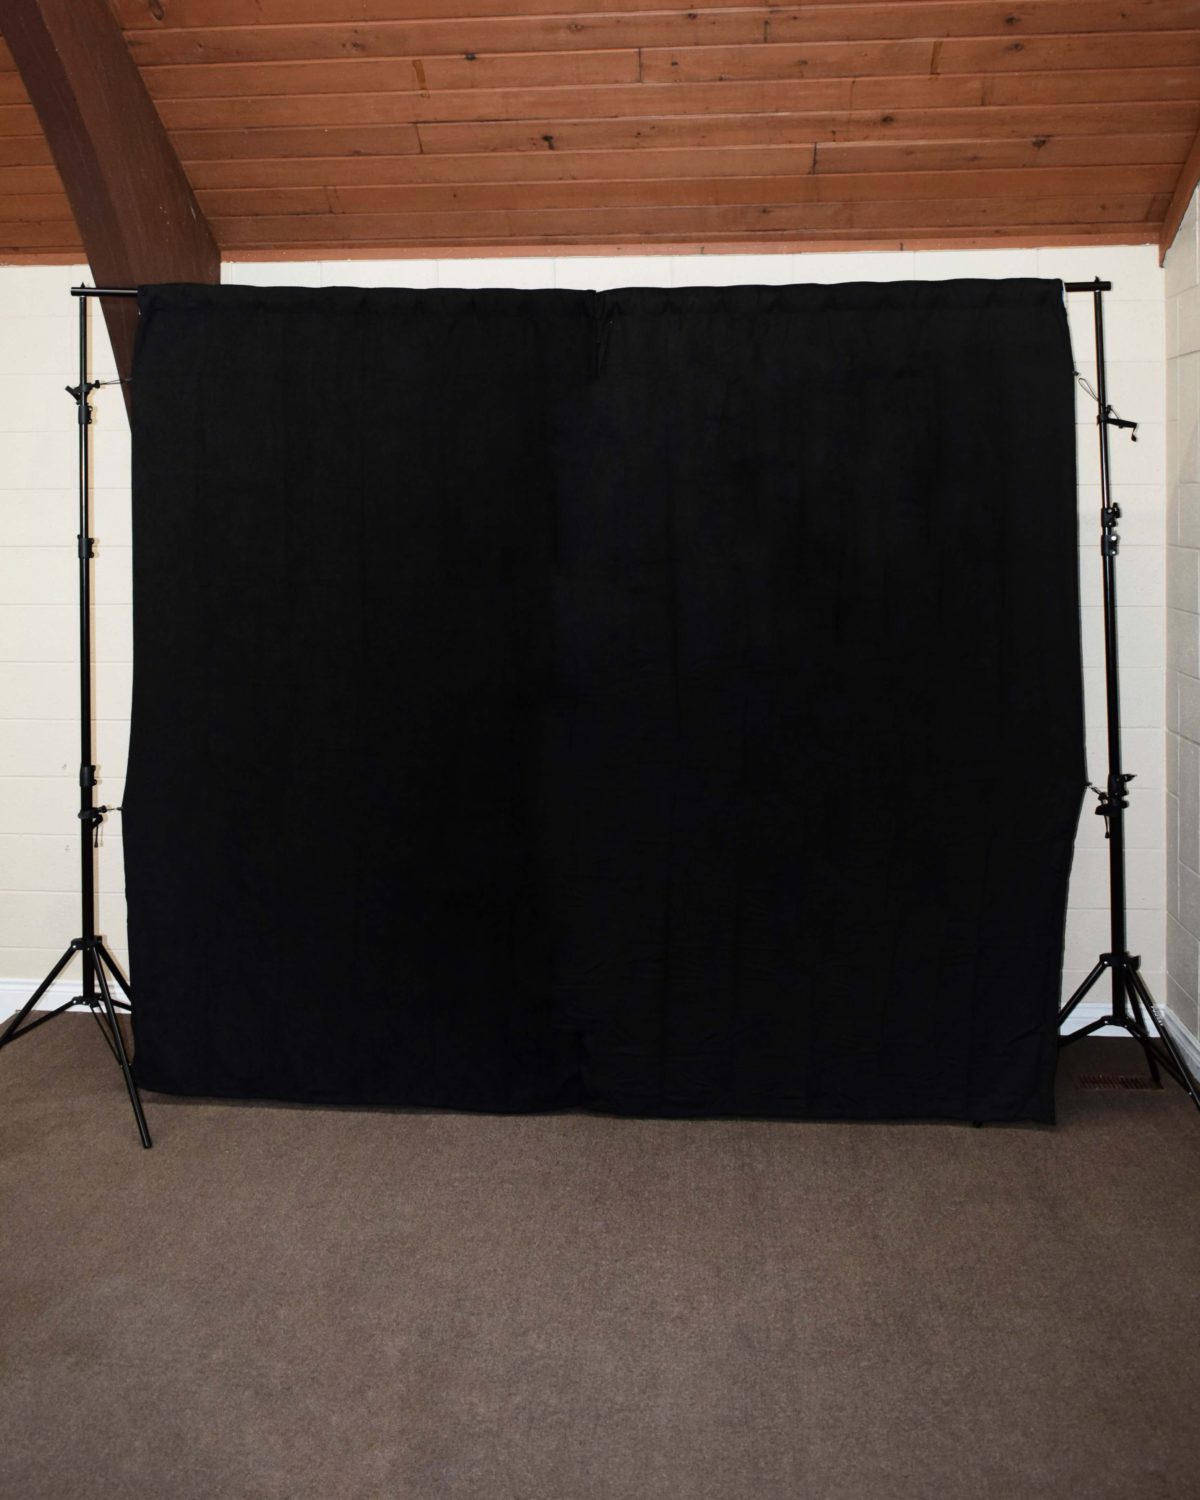 Standalone black backdrop fabric product front view